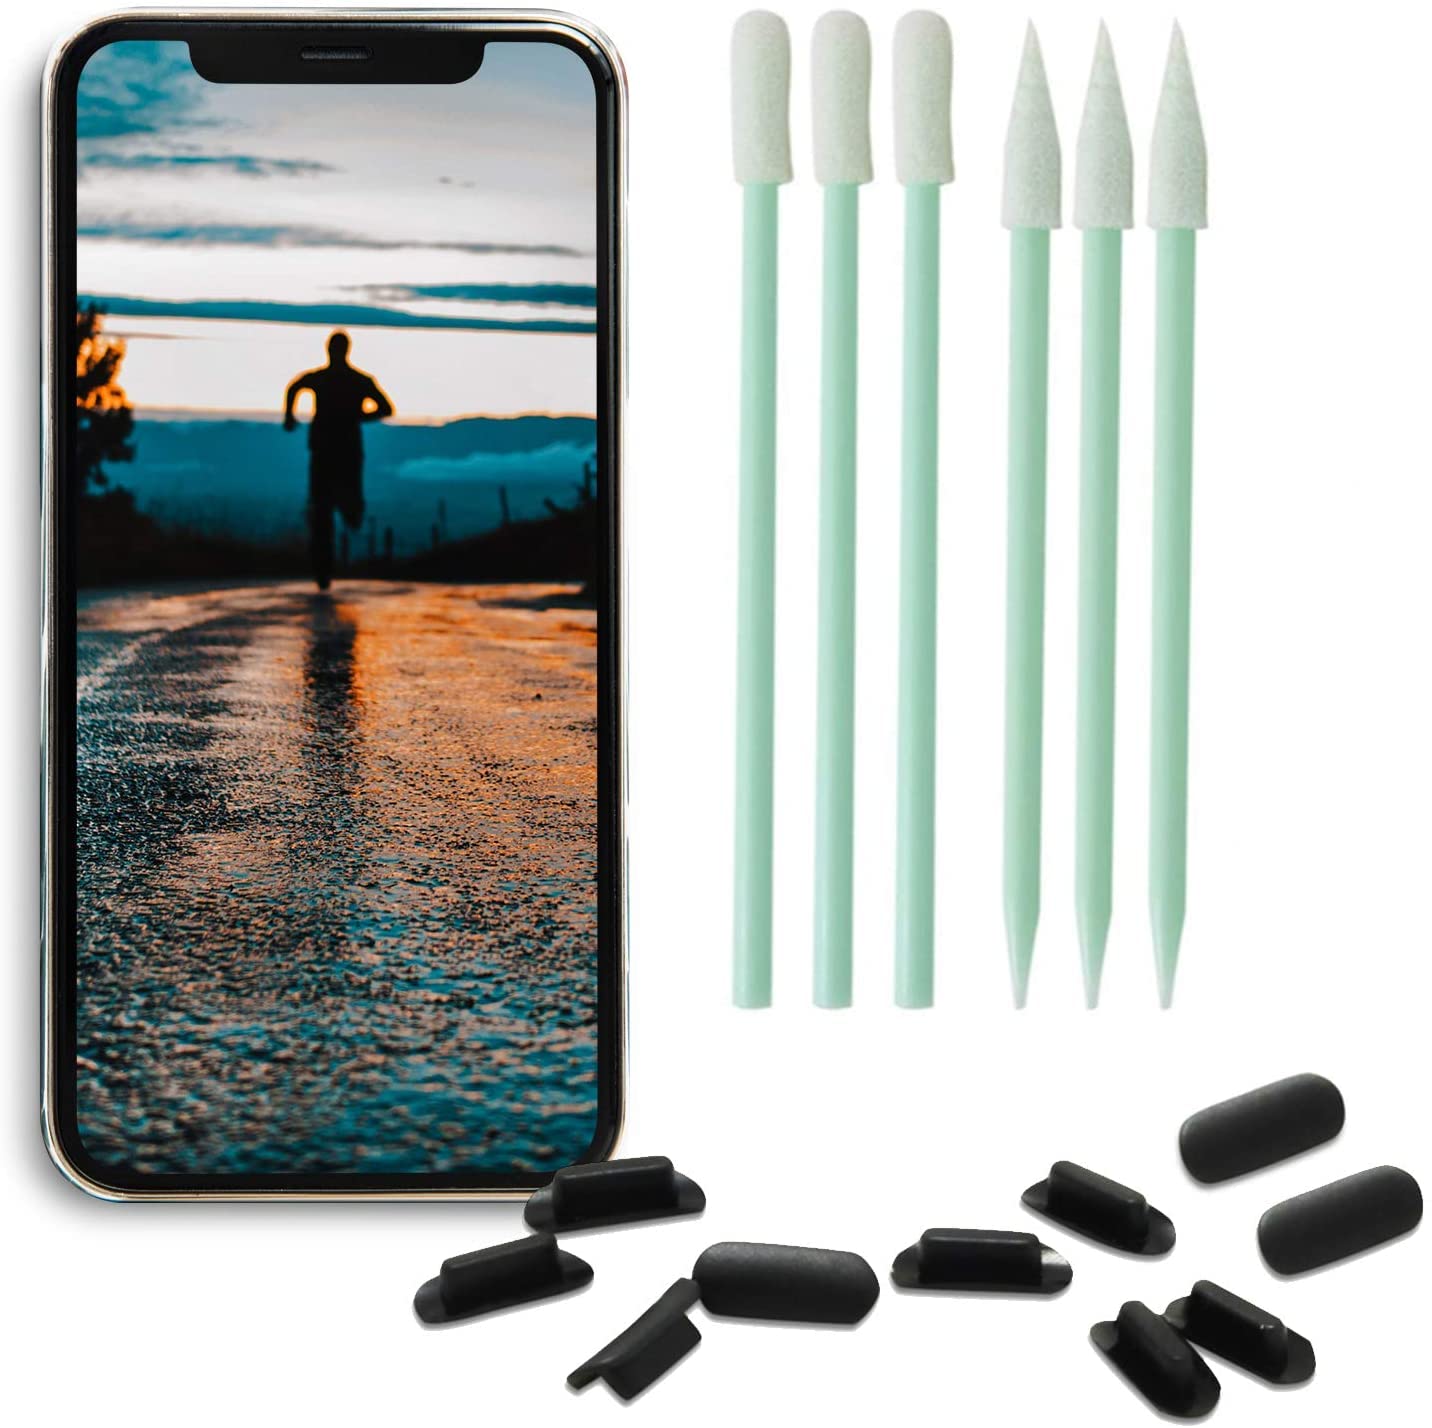 Cleaning kit for iPhone X